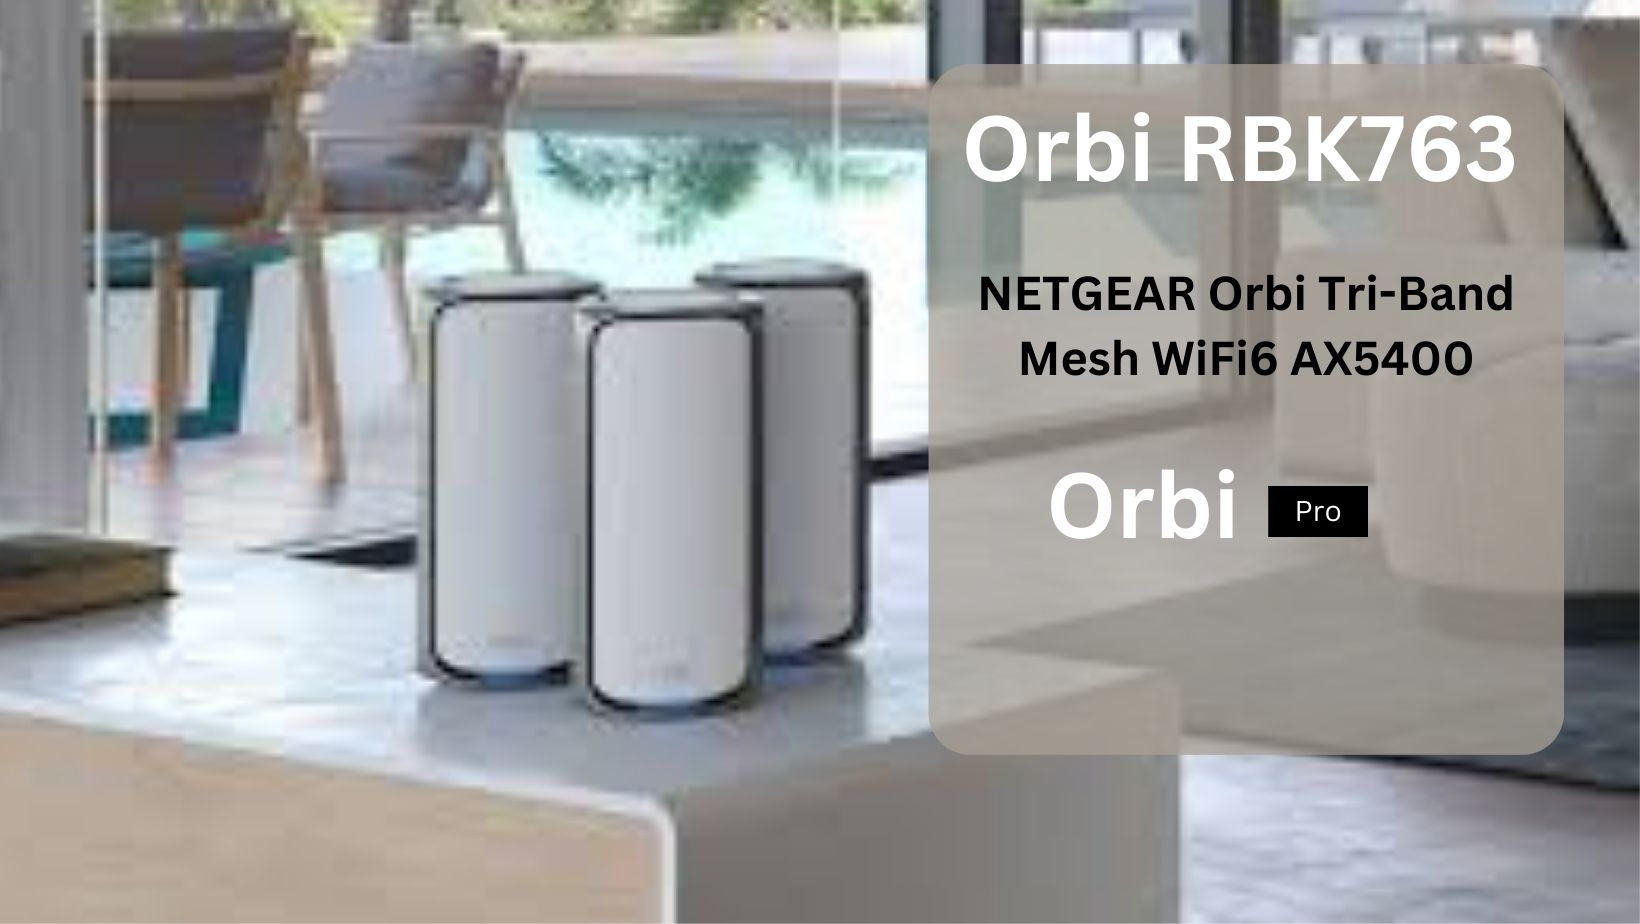 You are currently viewing NETGEAR Orbi Tri-Band Mesh WiFi6 AX5400 (RBK763)